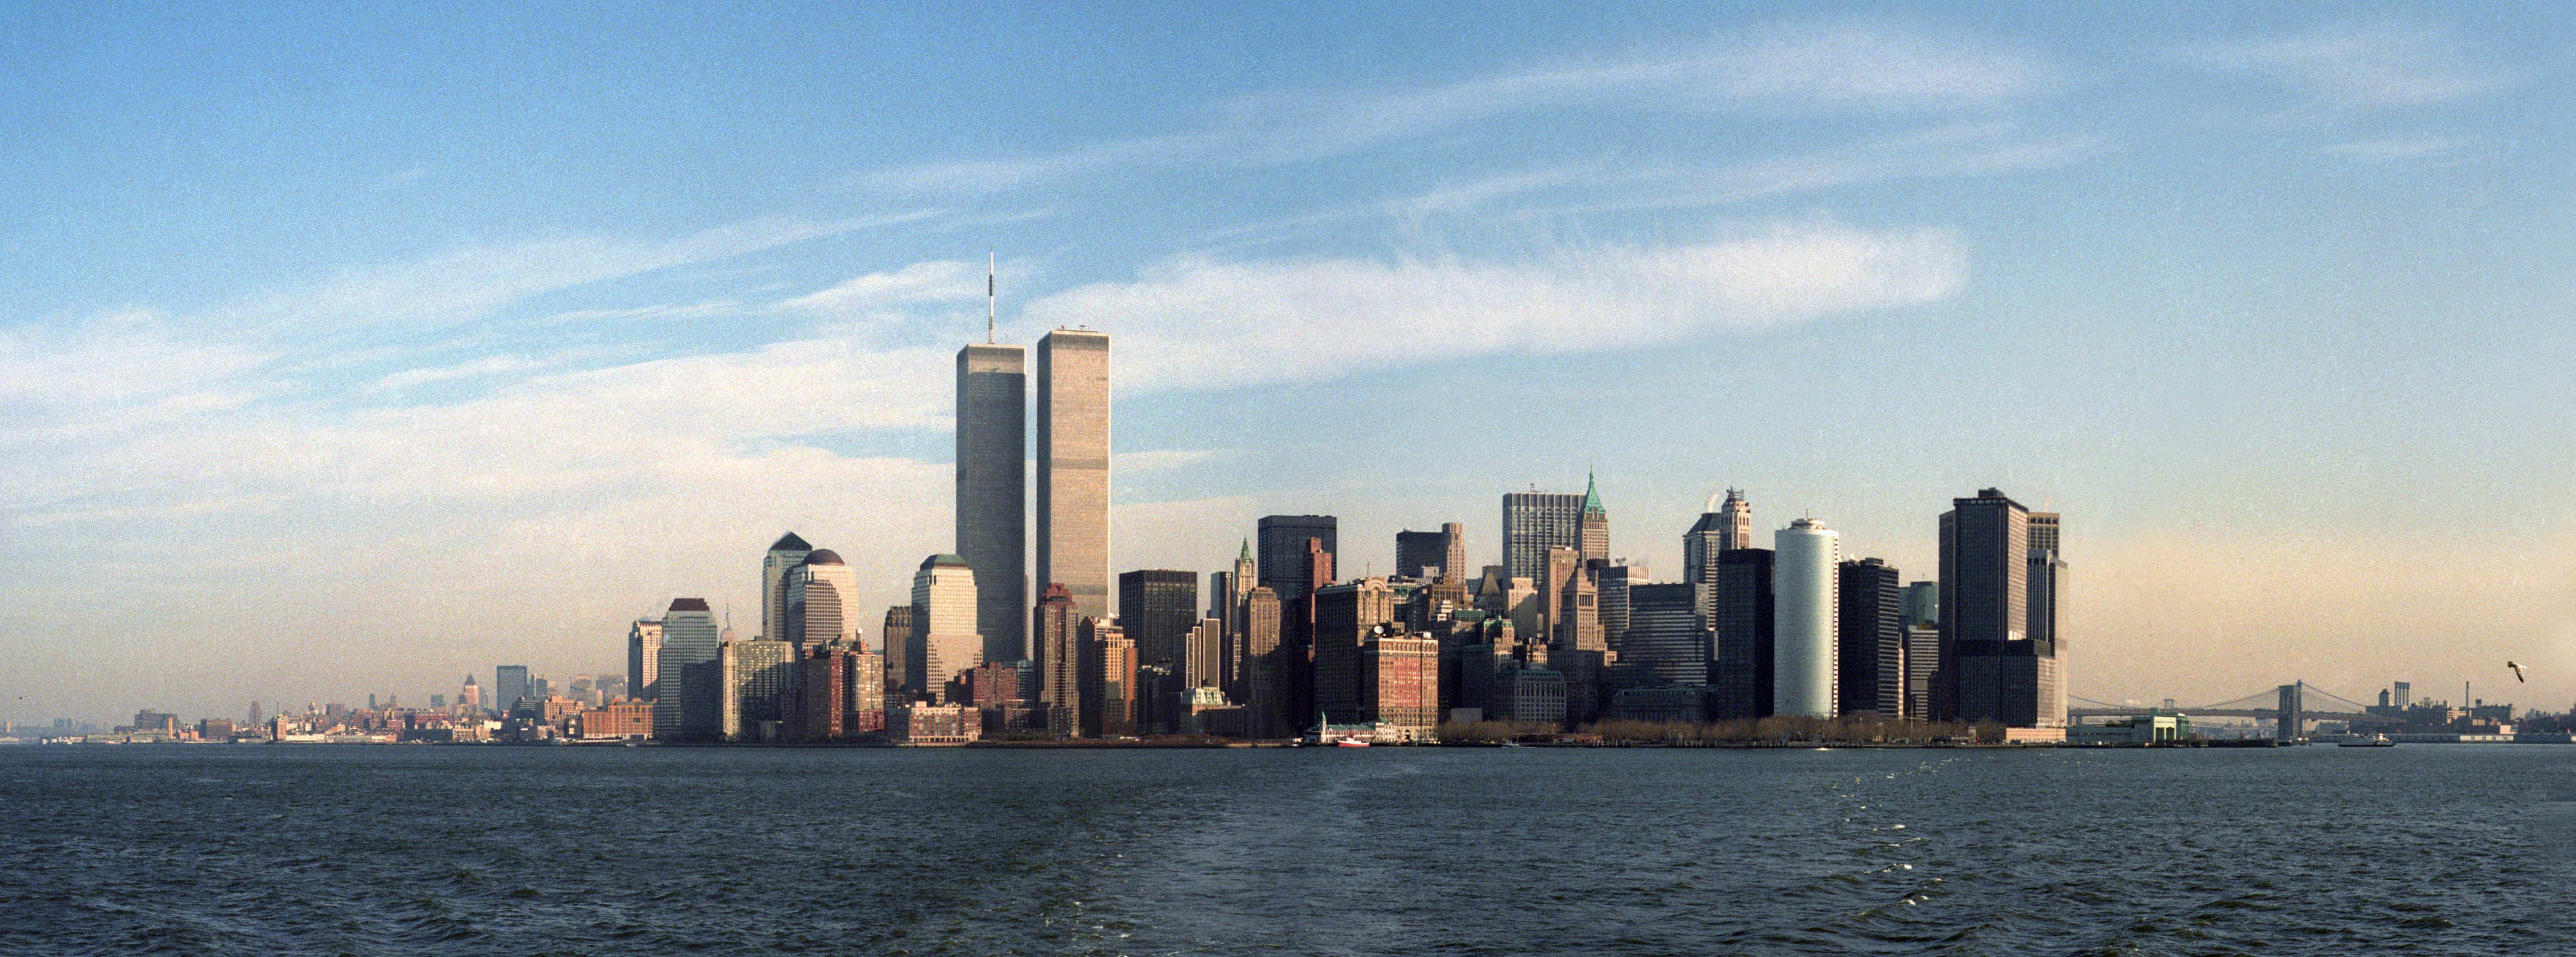 Favorite Images Of The Twin Towers Wallpaper - New York City - HD Wallpaper 